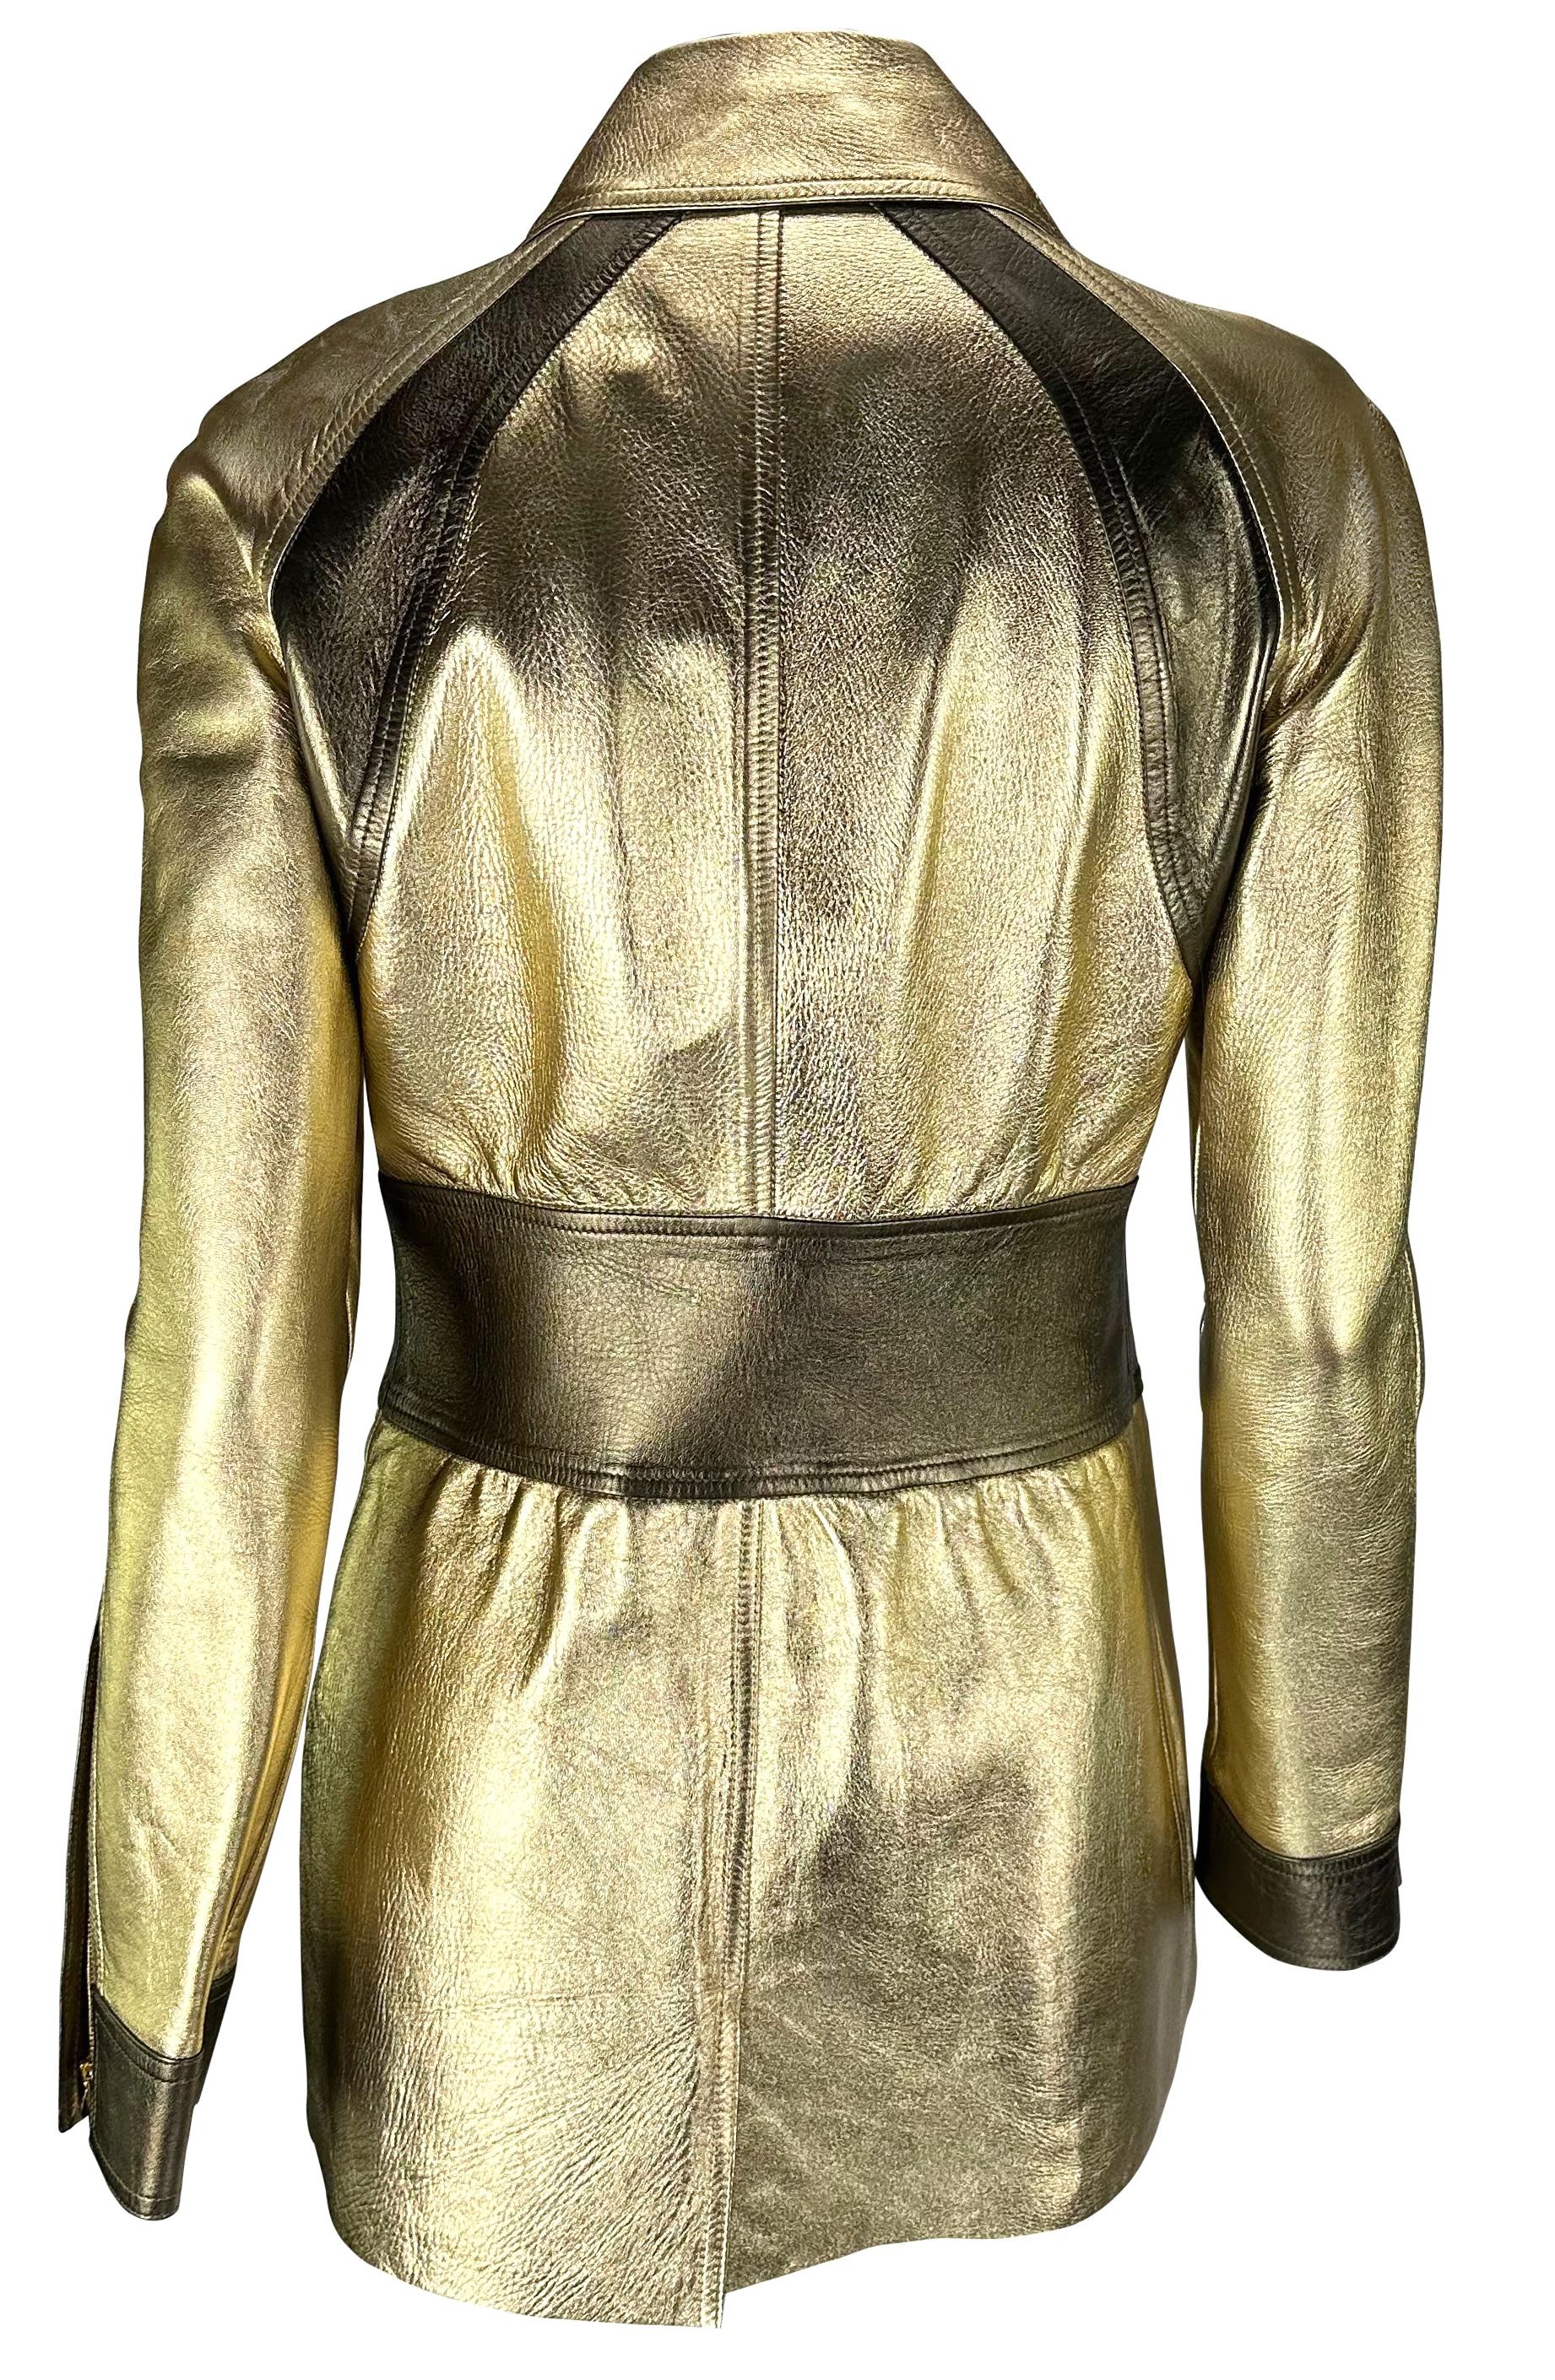 F/W 2000 Gucci by Tom Ford Gold Metallic Two-Tone Leather Jacket In Good Condition For Sale In West Hollywood, CA